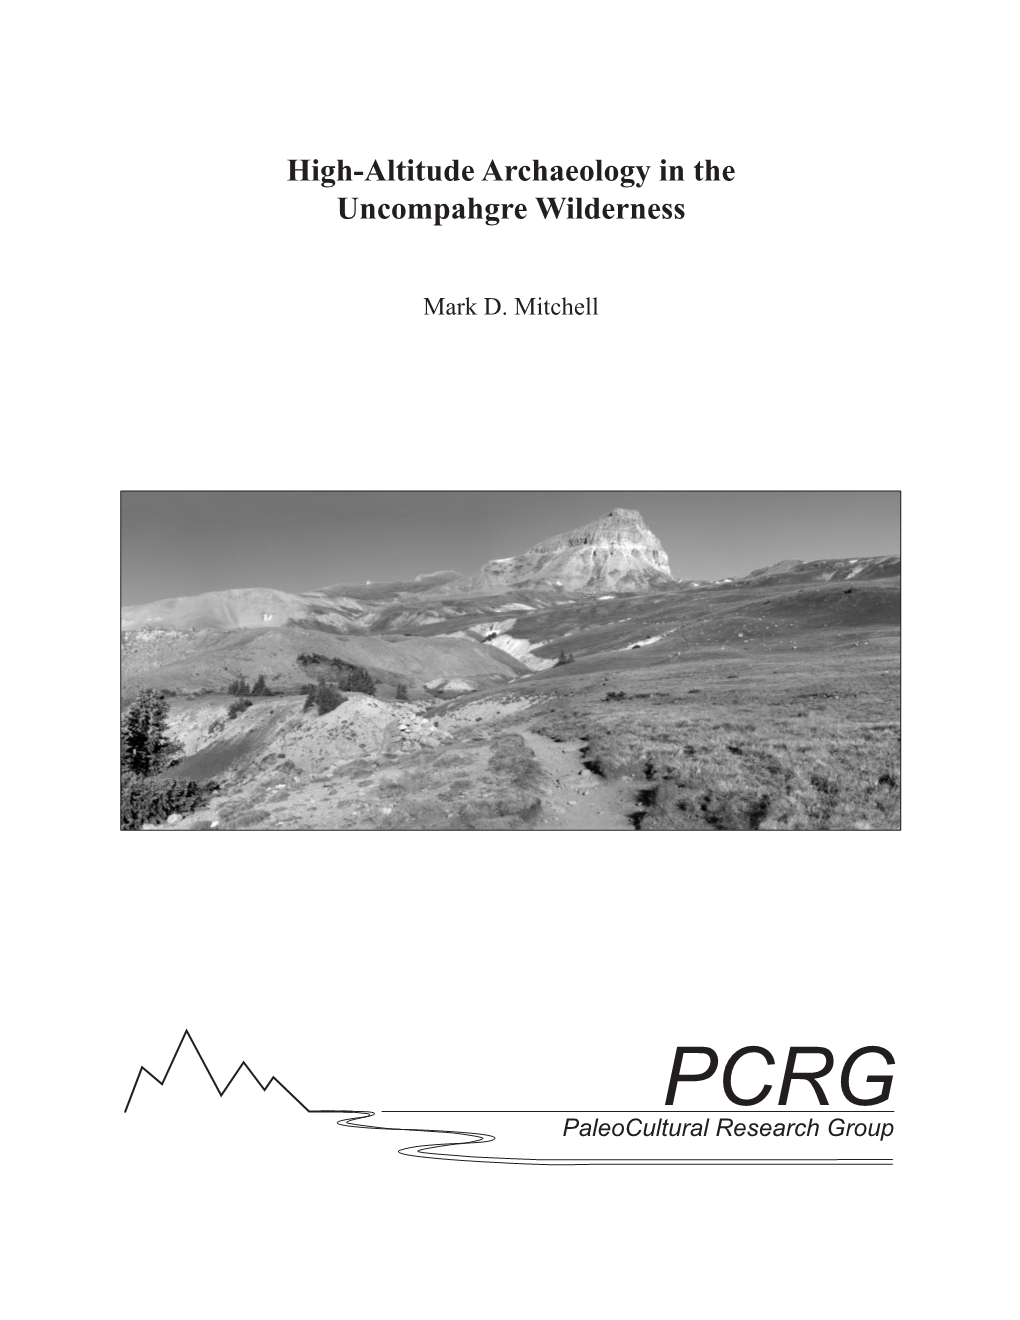 High-Altitude Archaeology in the Uncompahgre Wilderness